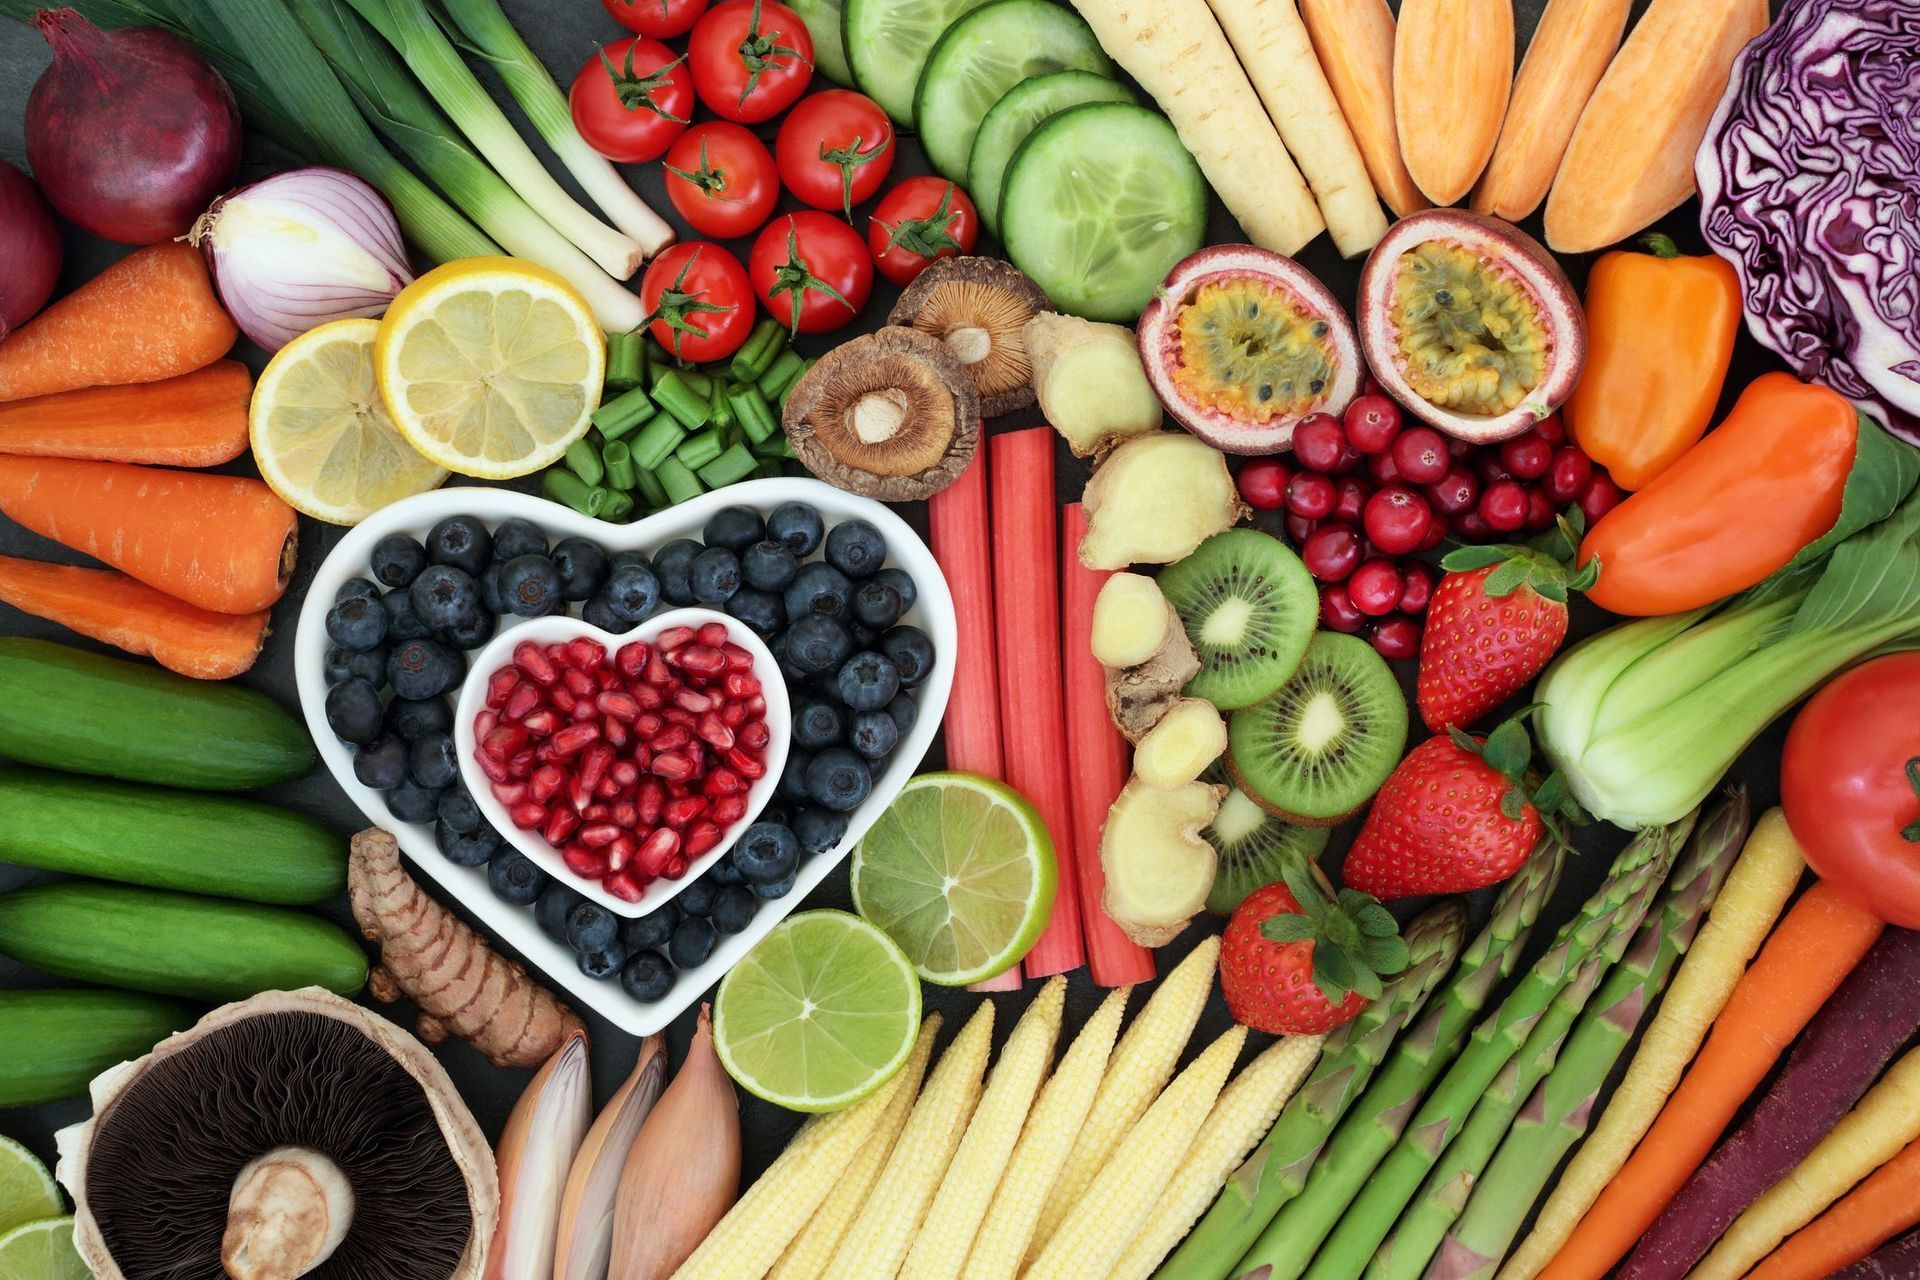 A variety of fruits and vegetables are arranged in a heart shape.